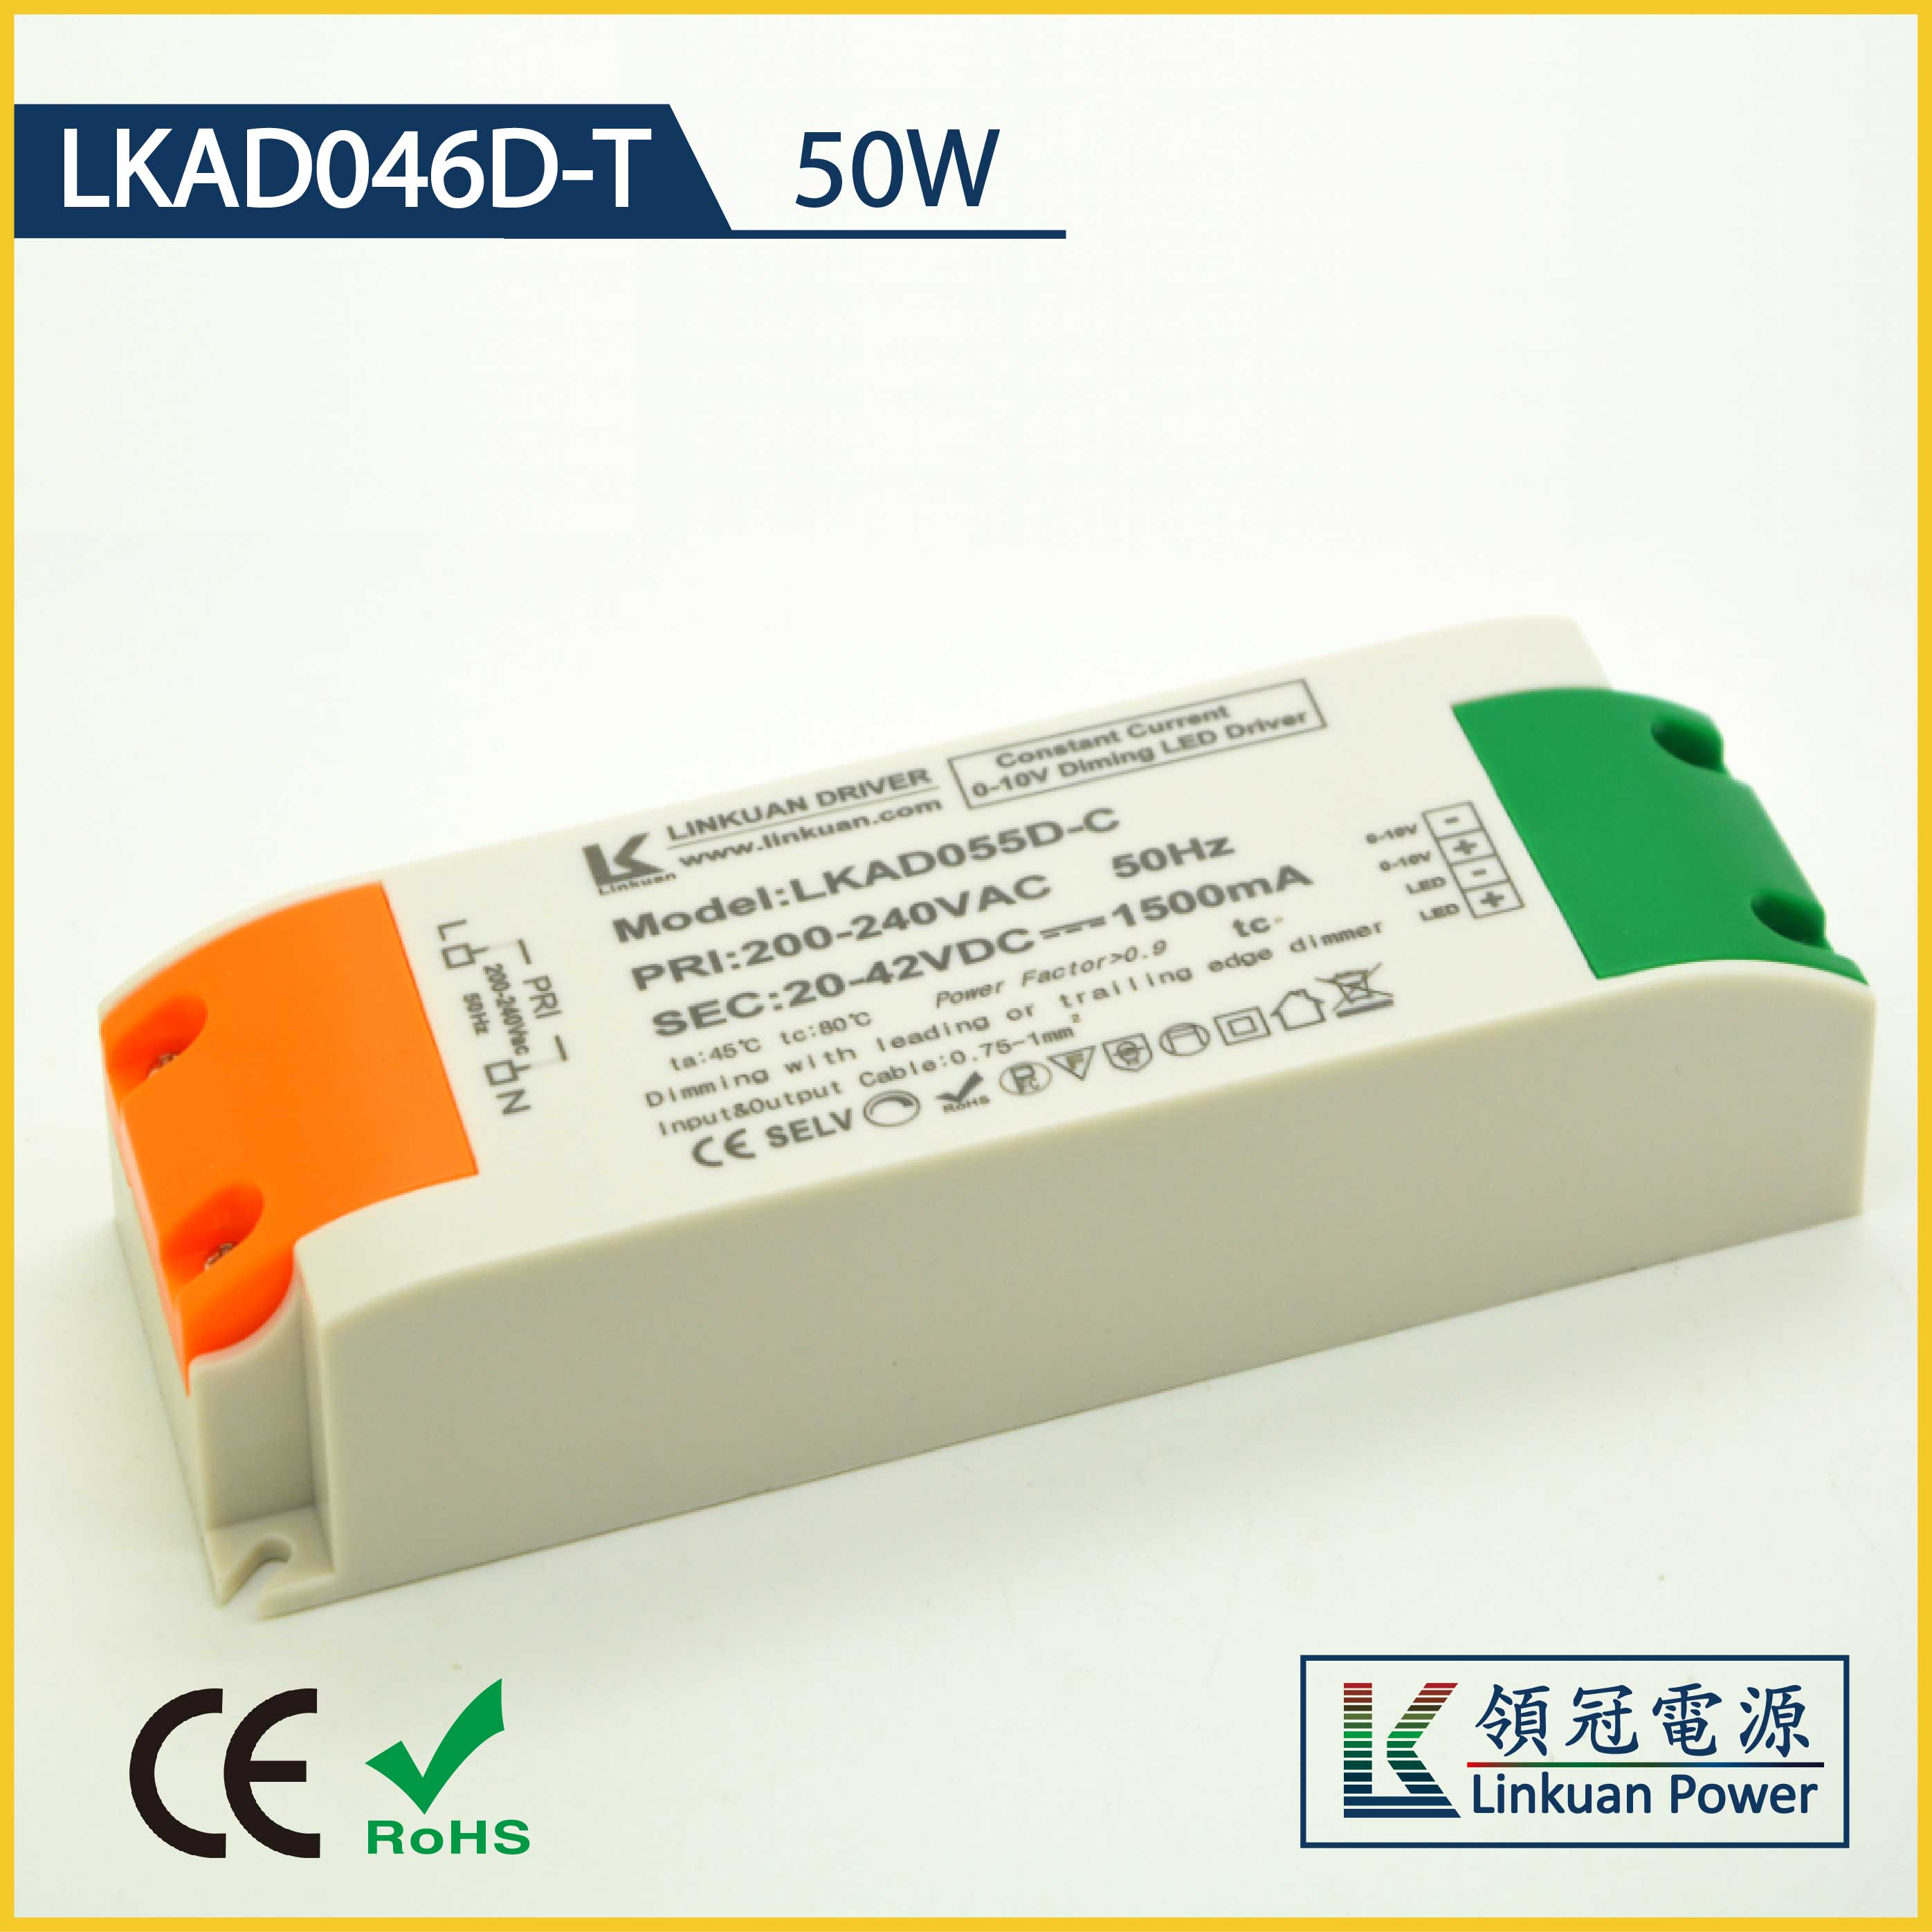 LKAD046D-T 50W 10-42V 1200mA triac dimmable led driver with DIP switch